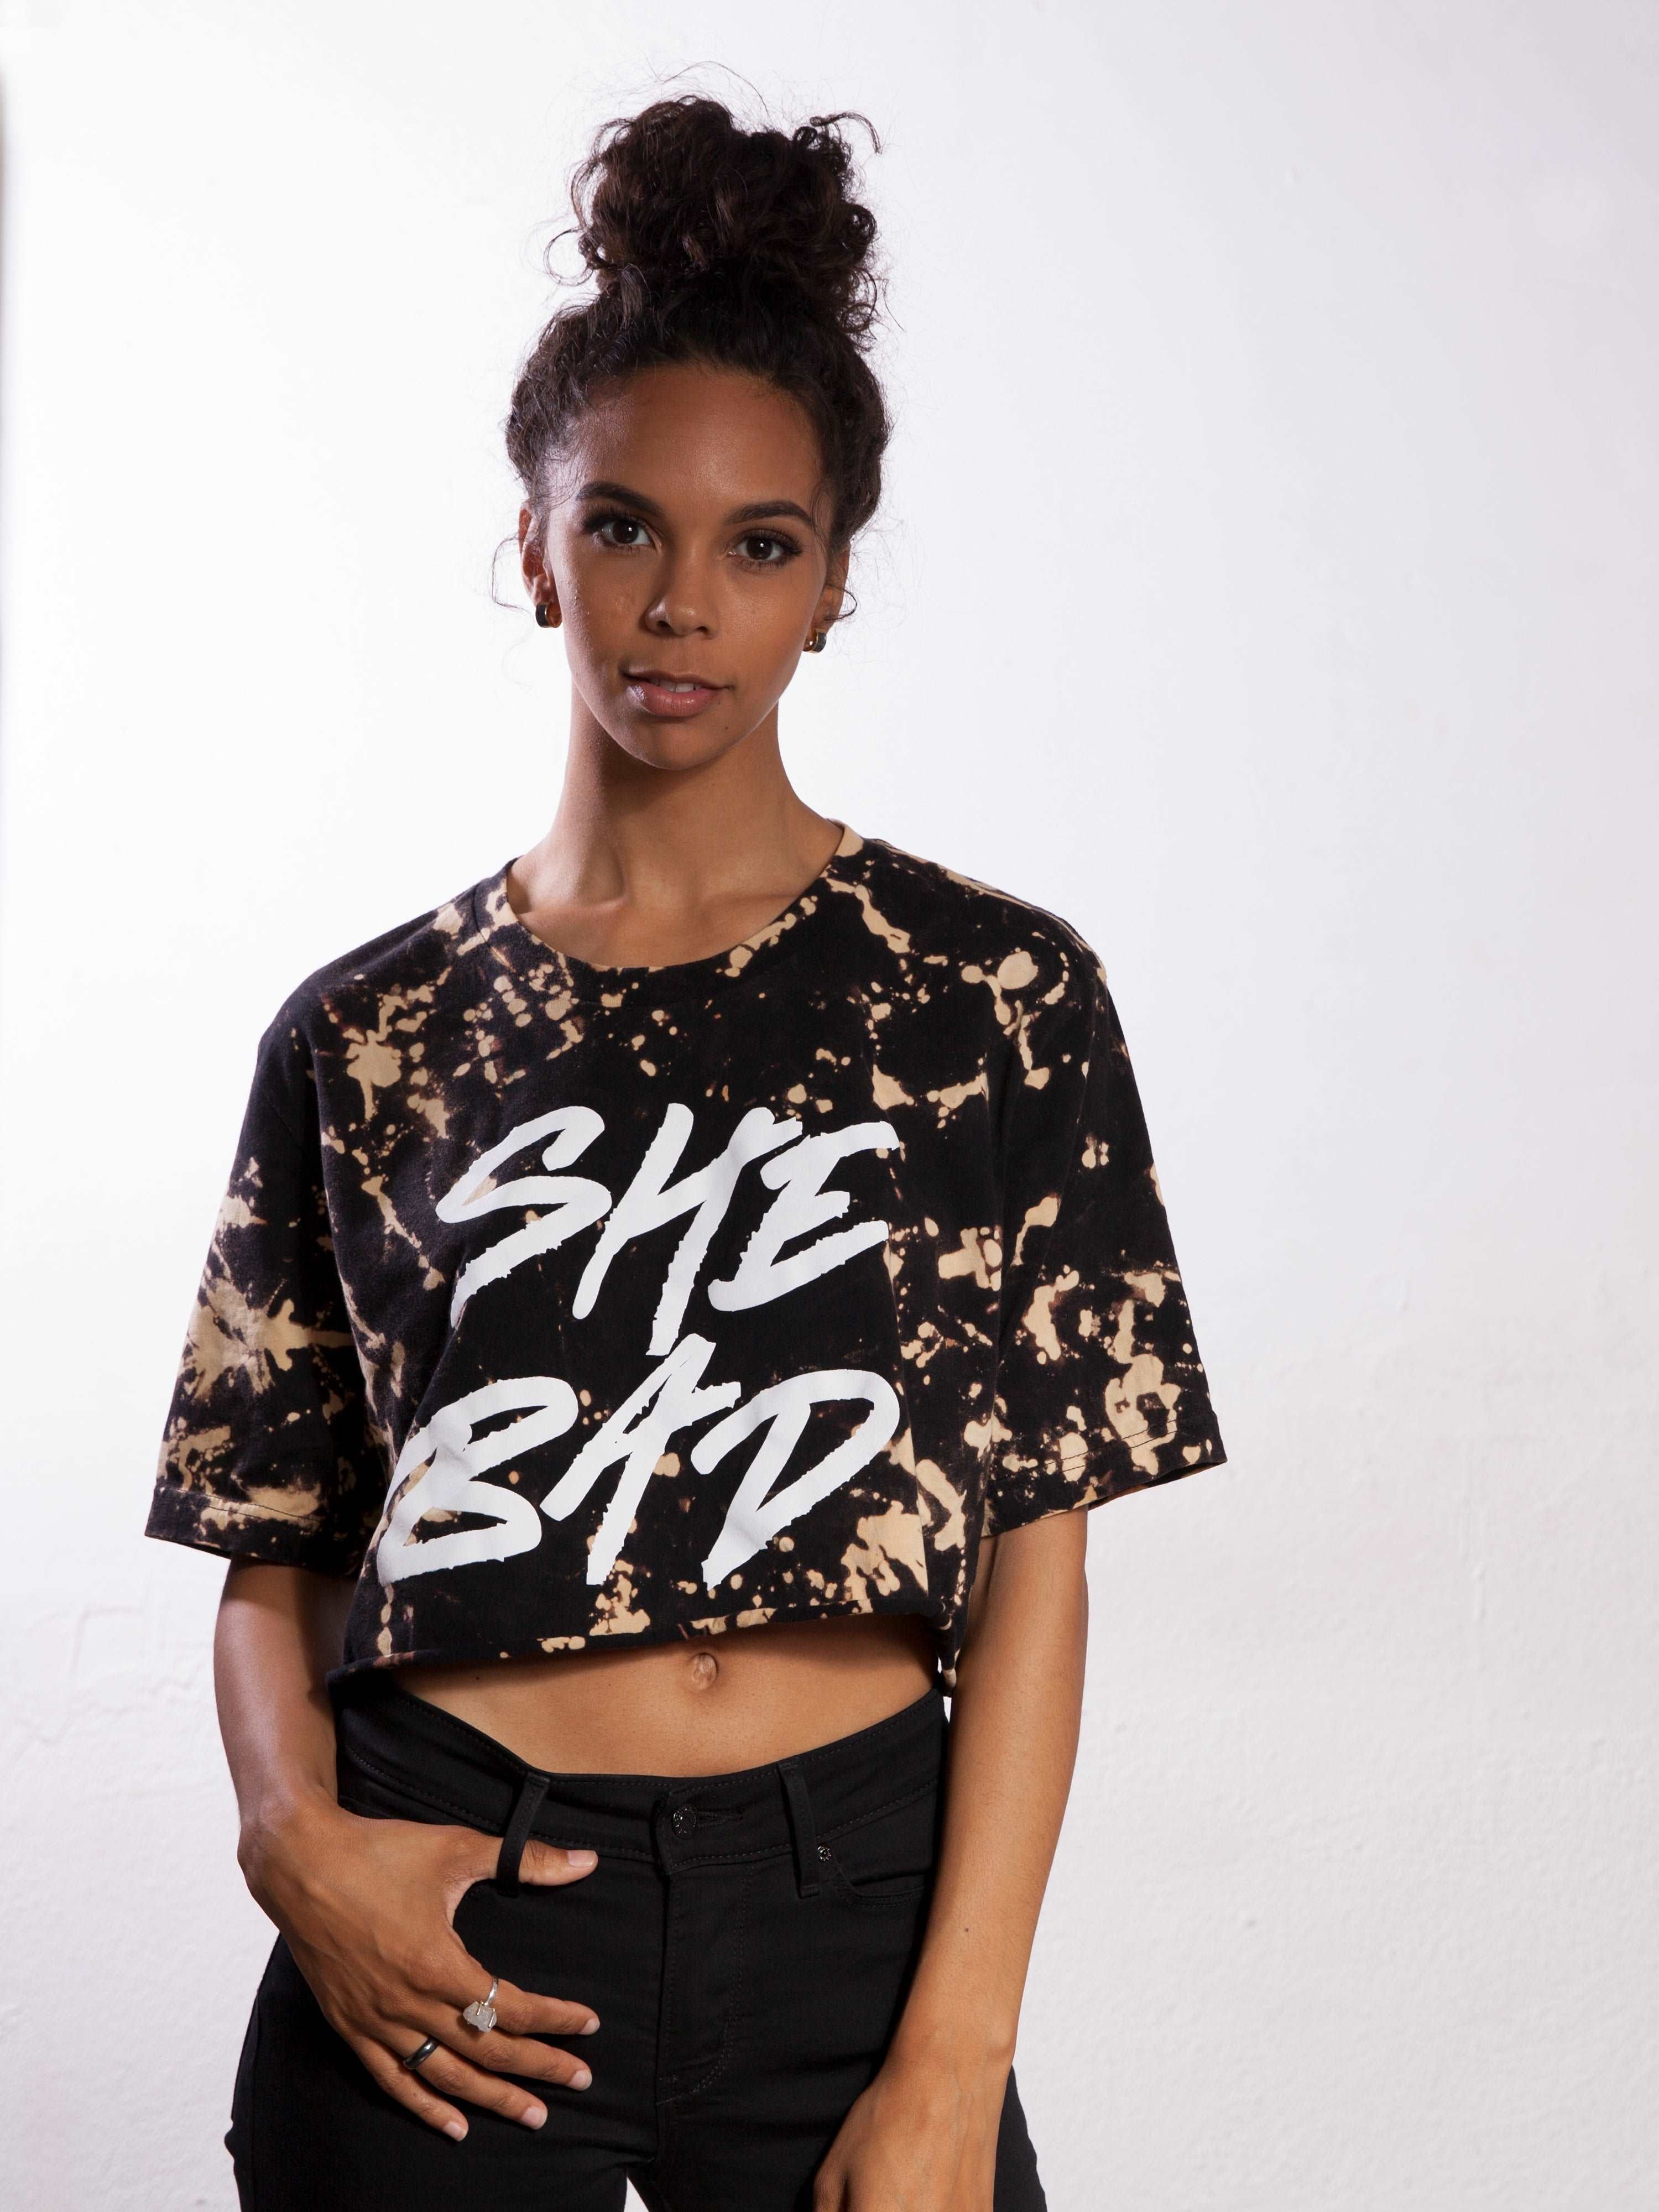 SHE BAD TIE DYED CROP T-SHIRT